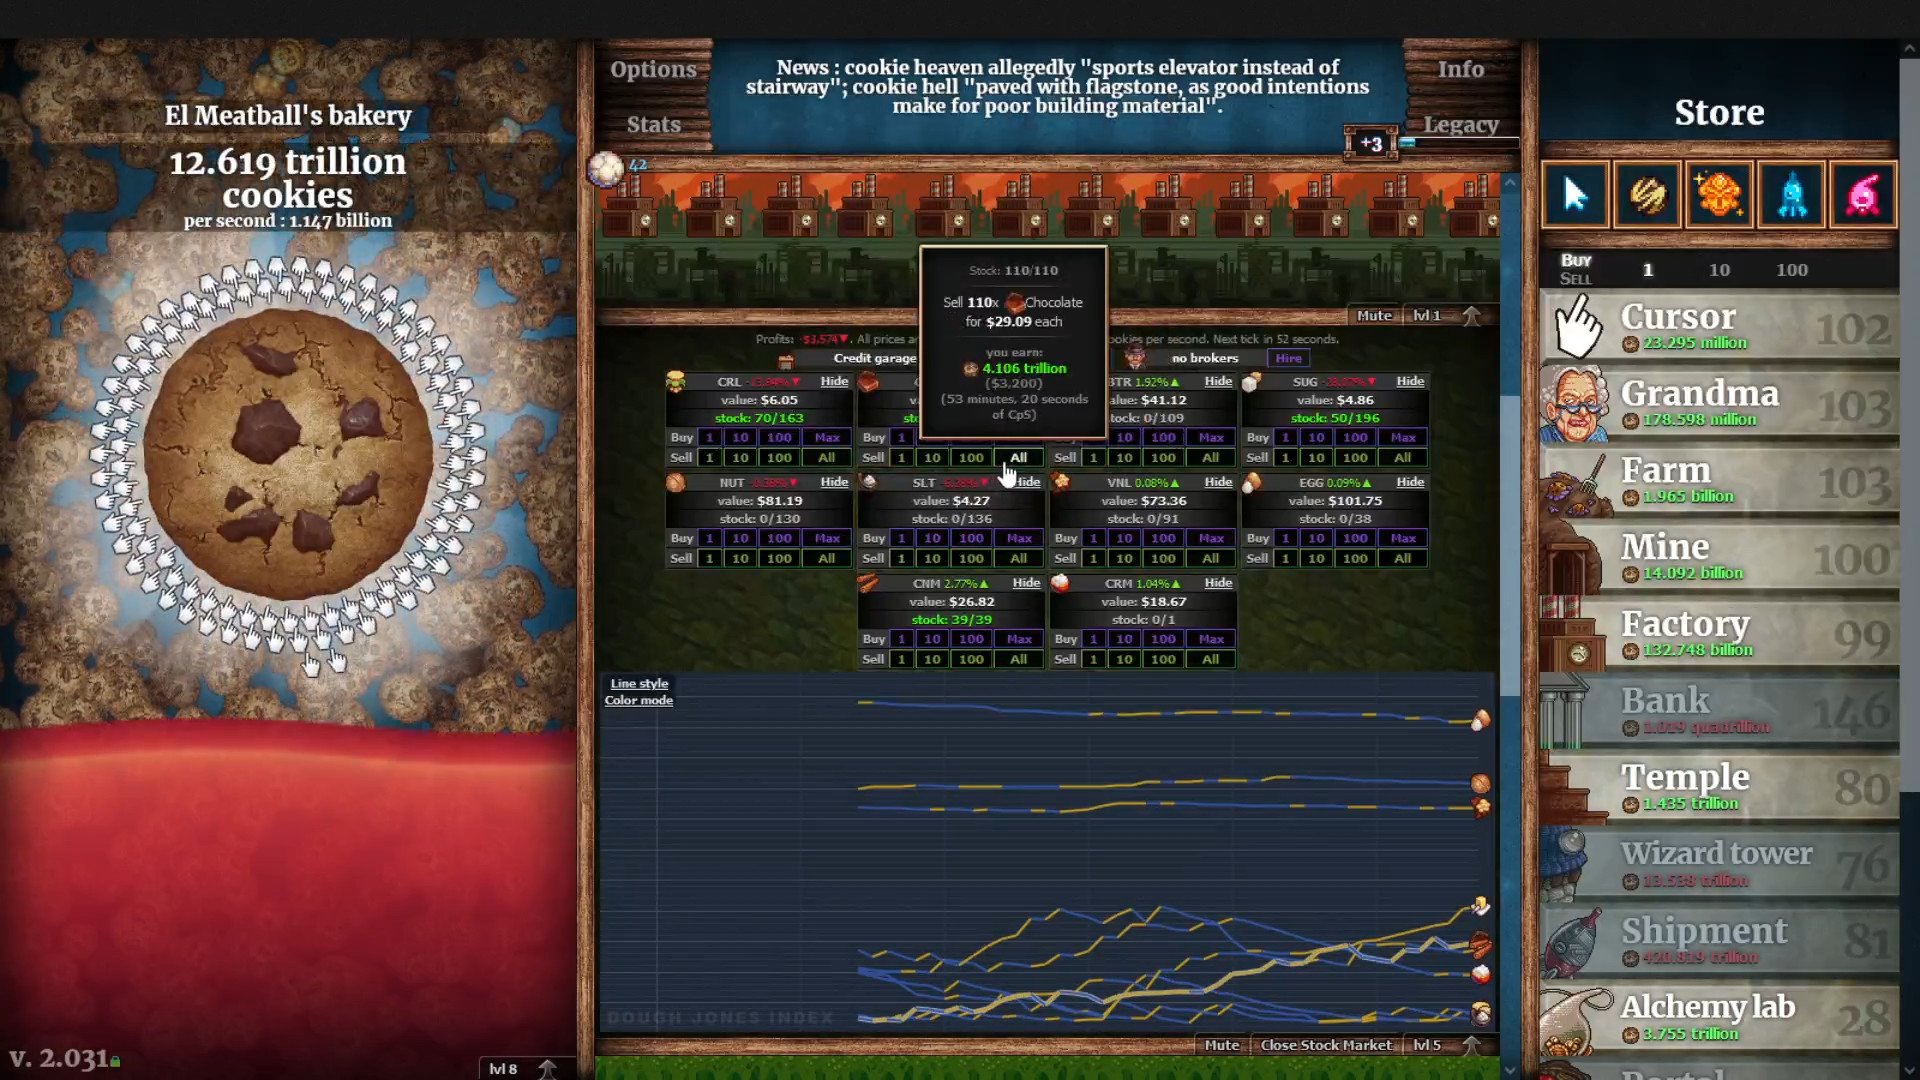 Cookie Clicker Is Beating Phasmophobia, Warframe, And Rainbow Six Siege In  Concurrent Players On Steam